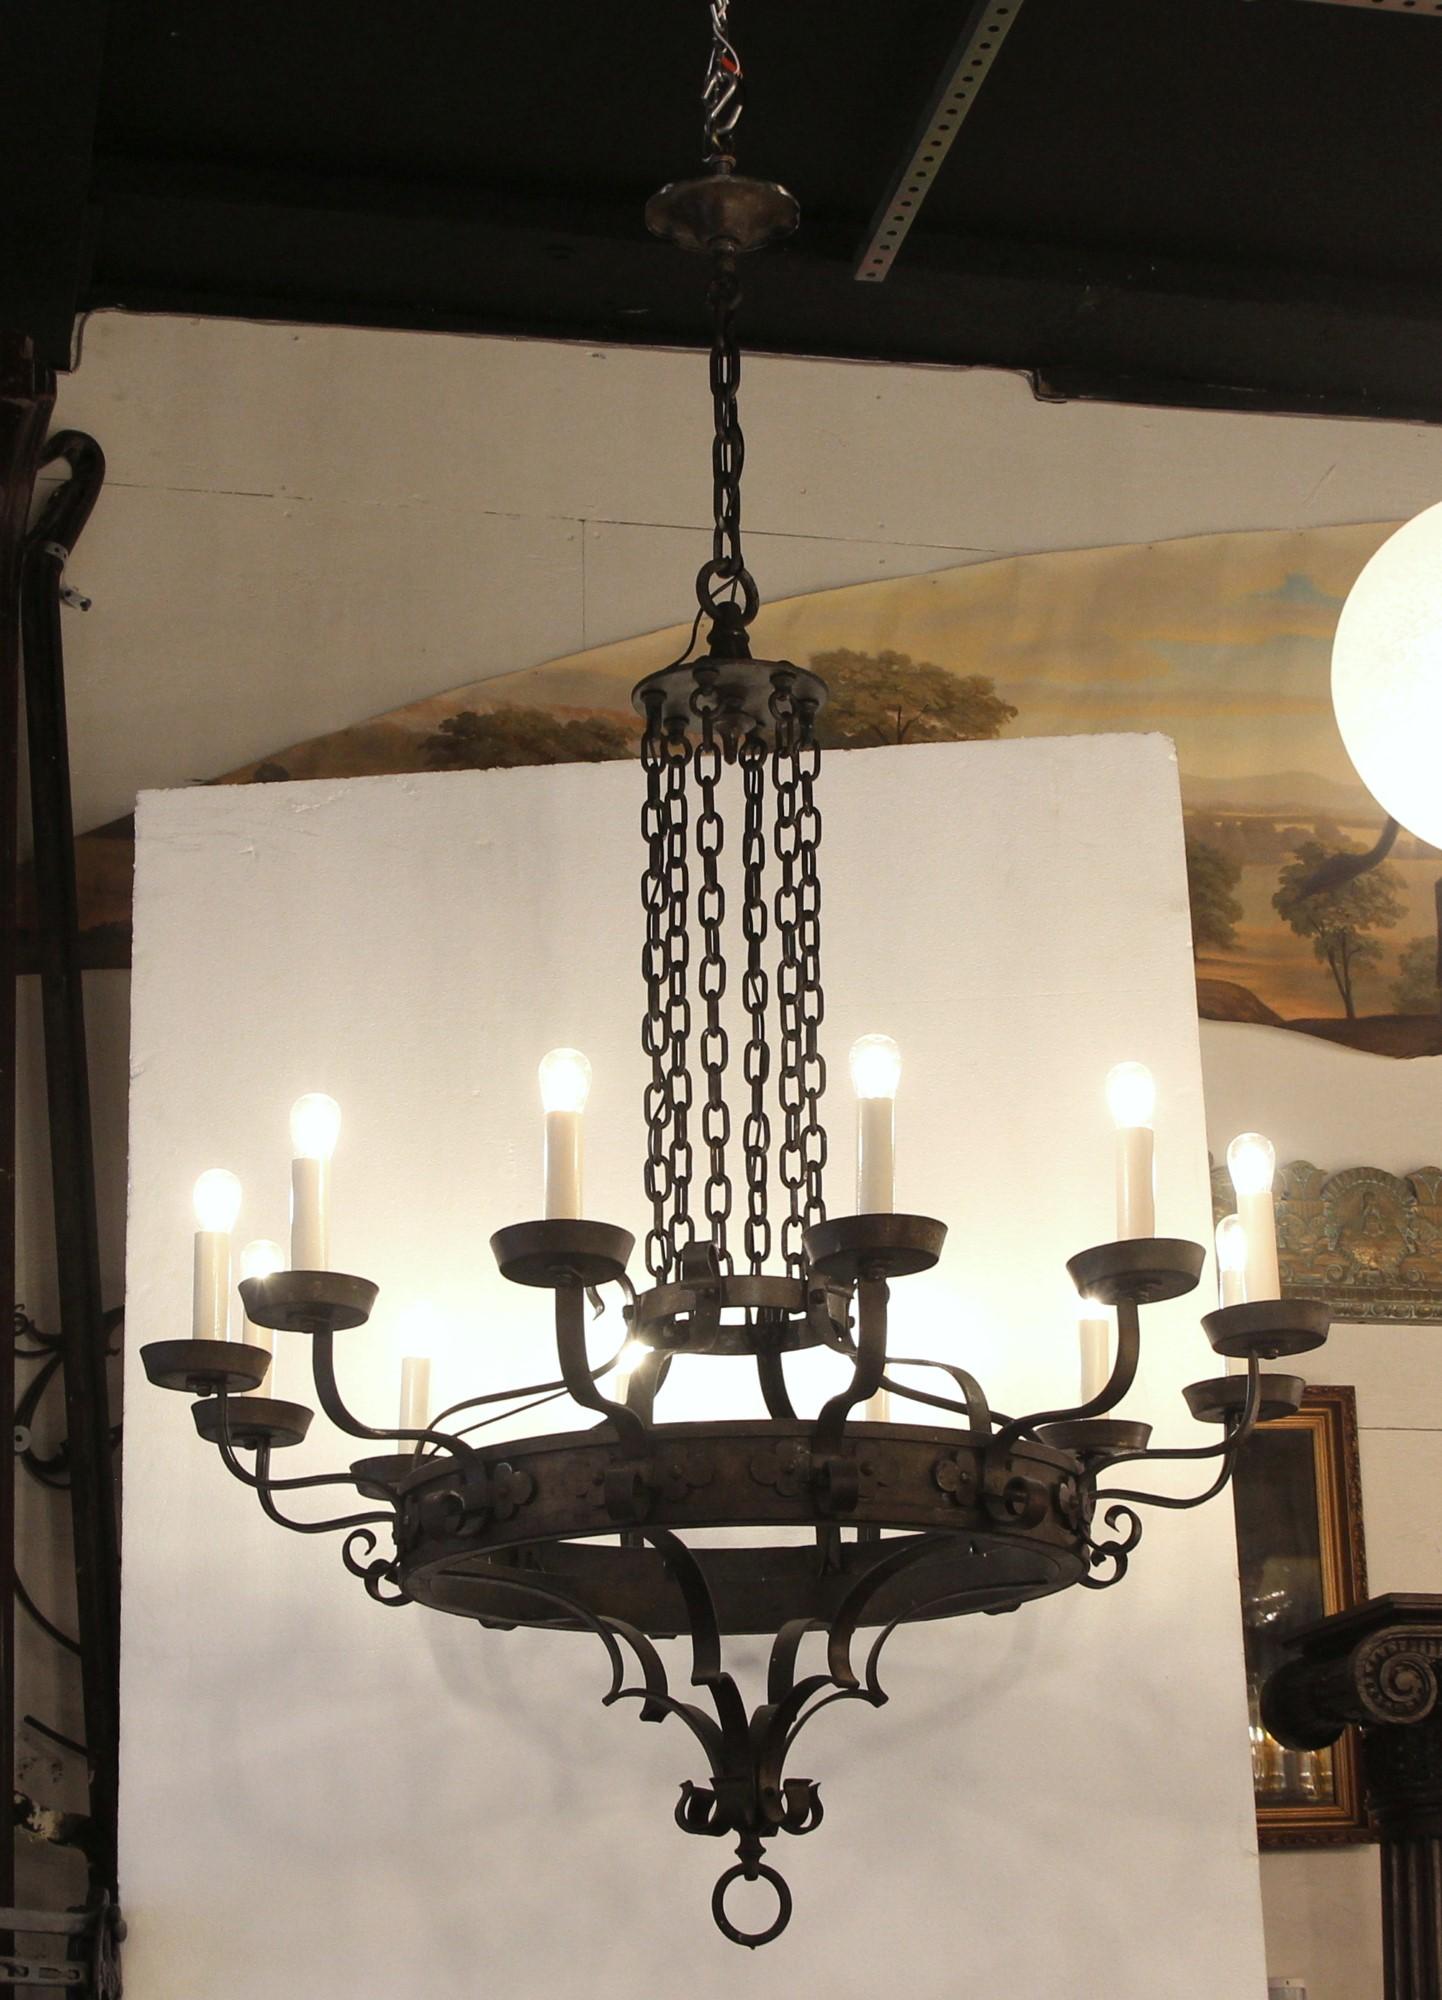 Early 20th century large scale Arts & Crafts chandelier with 12 arms. Done in wrought iron. Simple but beautiful scroll work. French wired. Cleaned and rewired. Please note, this item is located in one of our NYC locations.